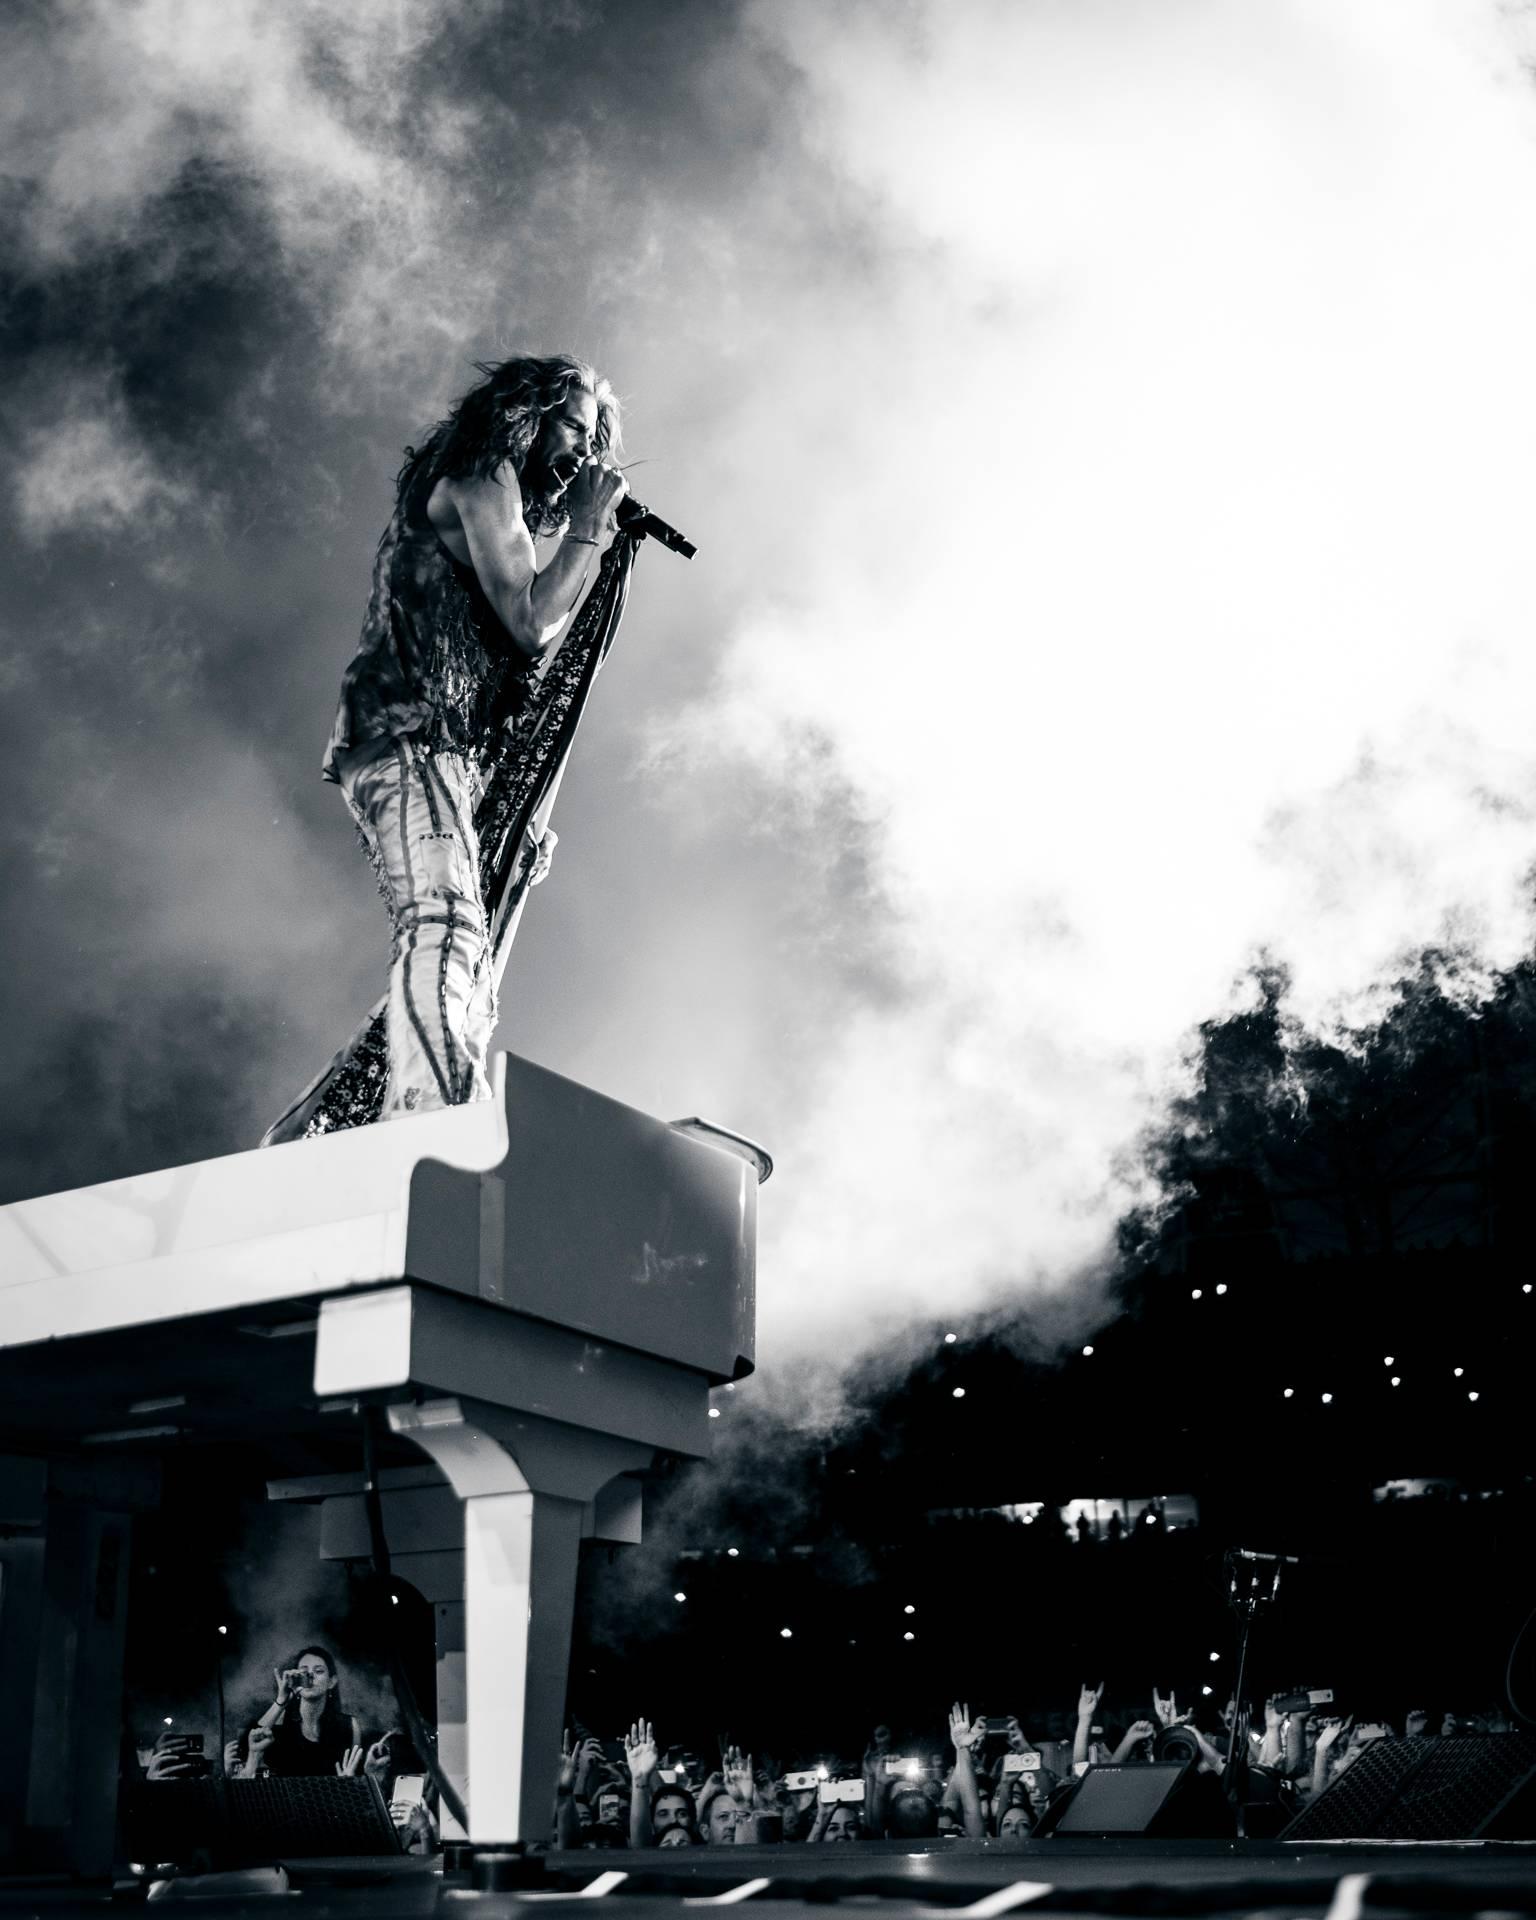 Steven Tyler in Concert

Archival pigment print 

Edition size:  25

16" x 20"  print

Please inquire about framing options

BIO
"A gifted young street photographer, who just happens to be the son of Aerosmith’s rhythm guitarist, Brad Whitford, is